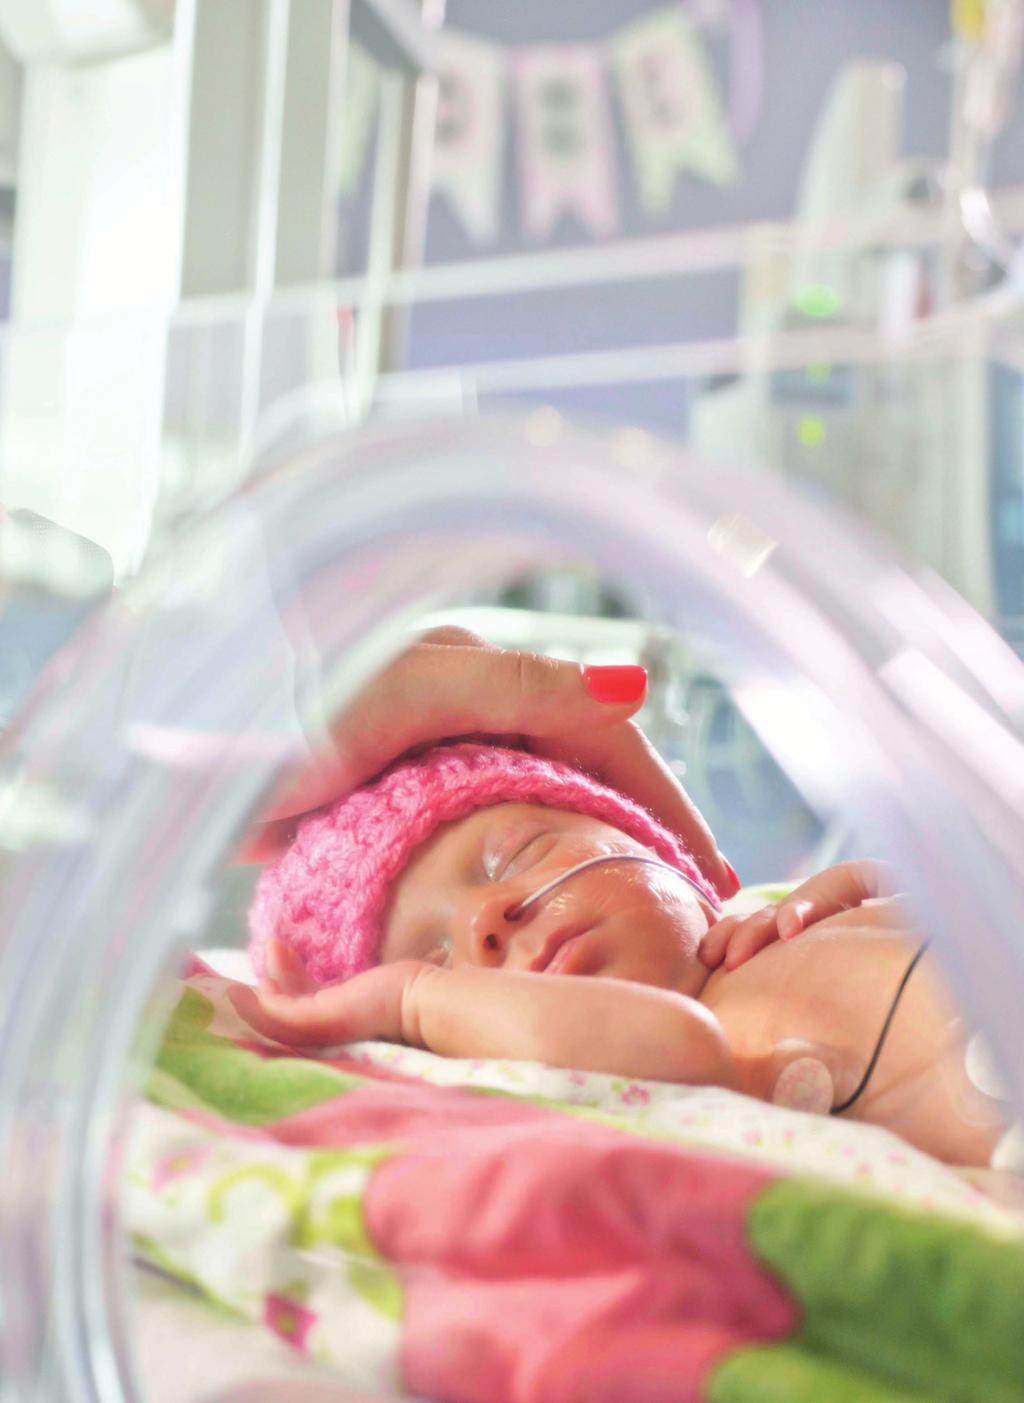 NEONATAL INTENSIVE CARE UNIT (NICU) No mother expects to deliver a very low birth weight baby or one with health challenges but, if you do, you can feel assured knowing our NICU is only steps away.